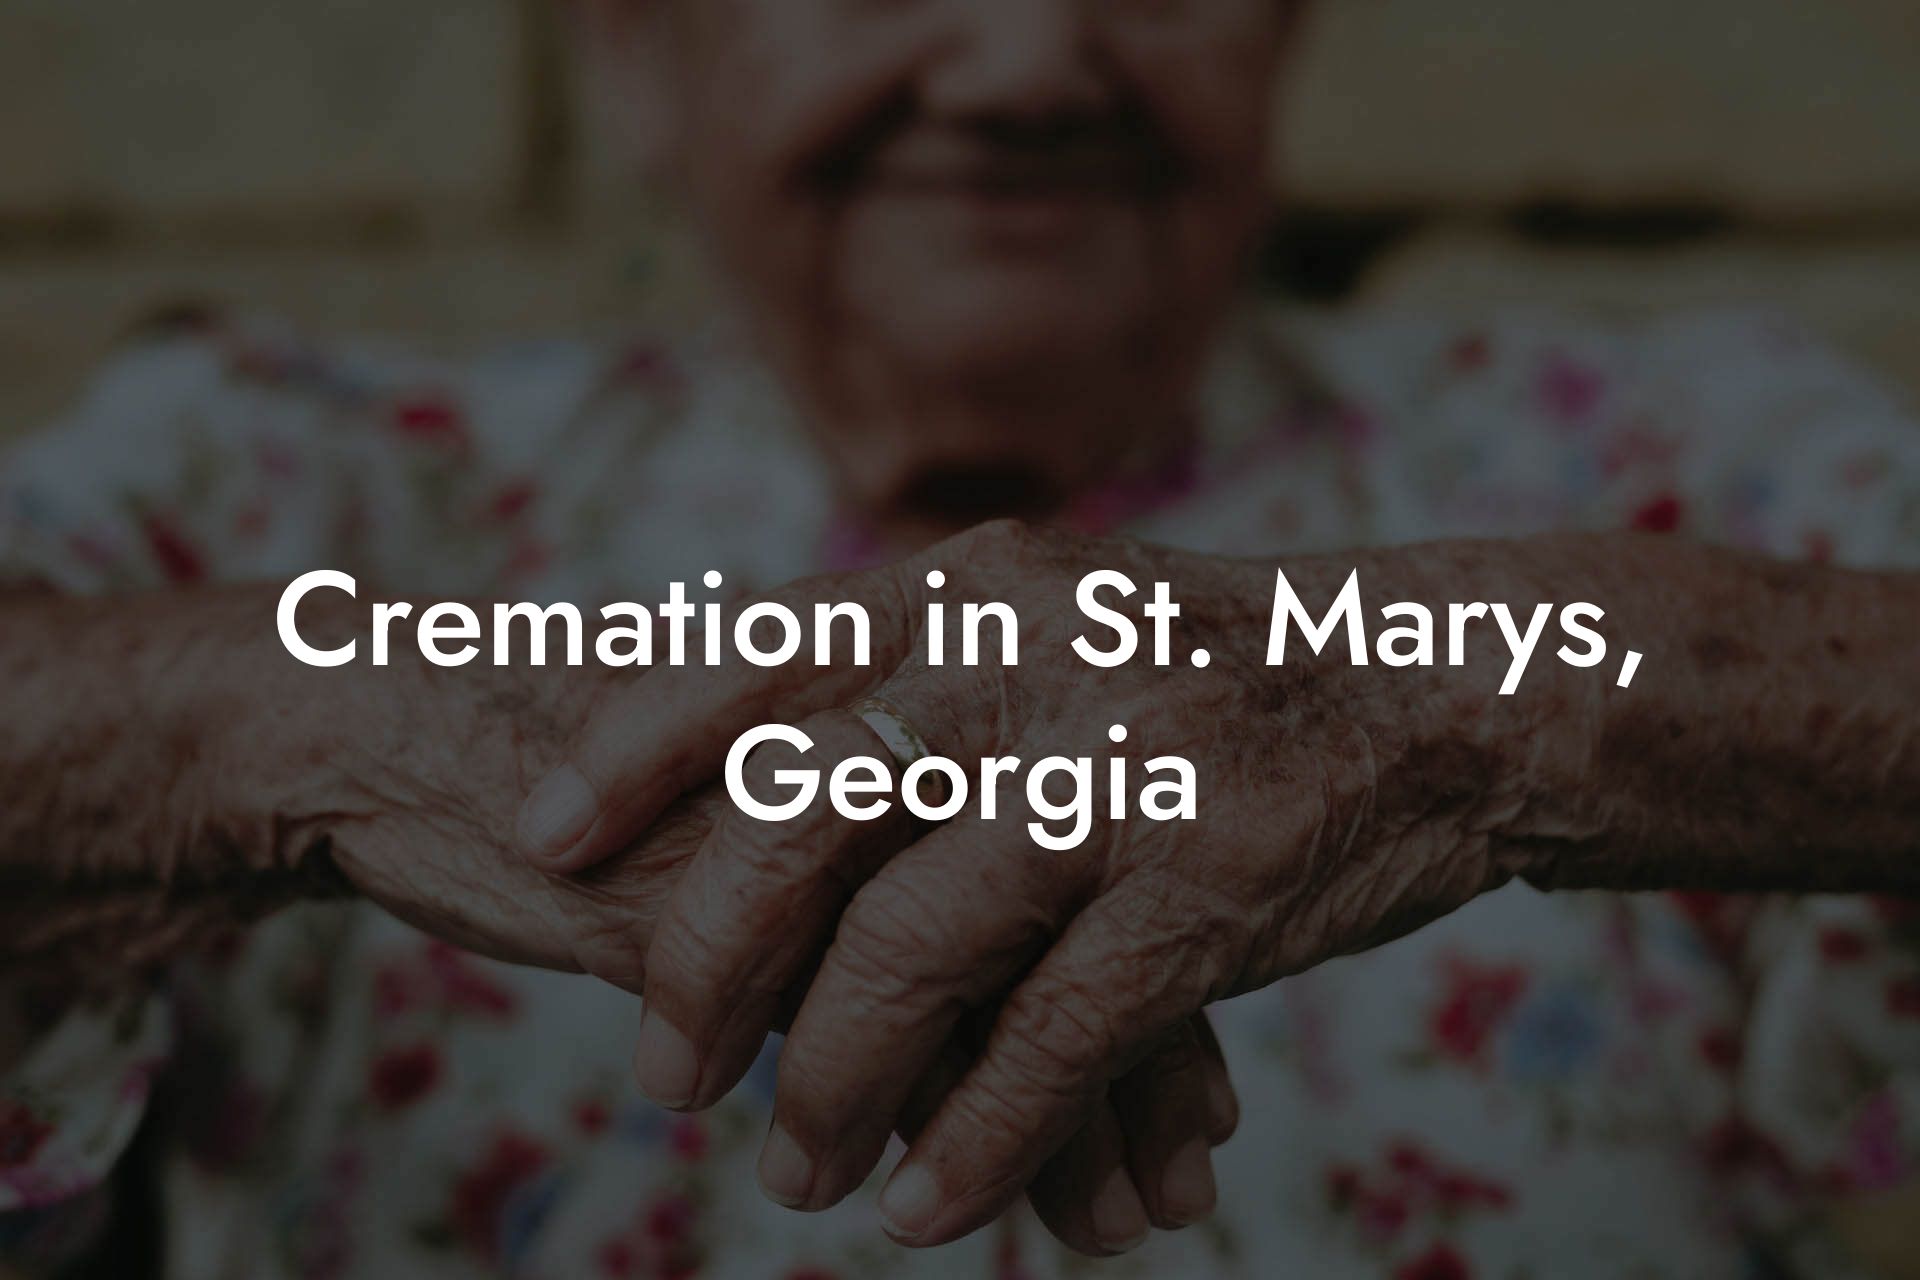 Cremation in St. Marys, Georgia